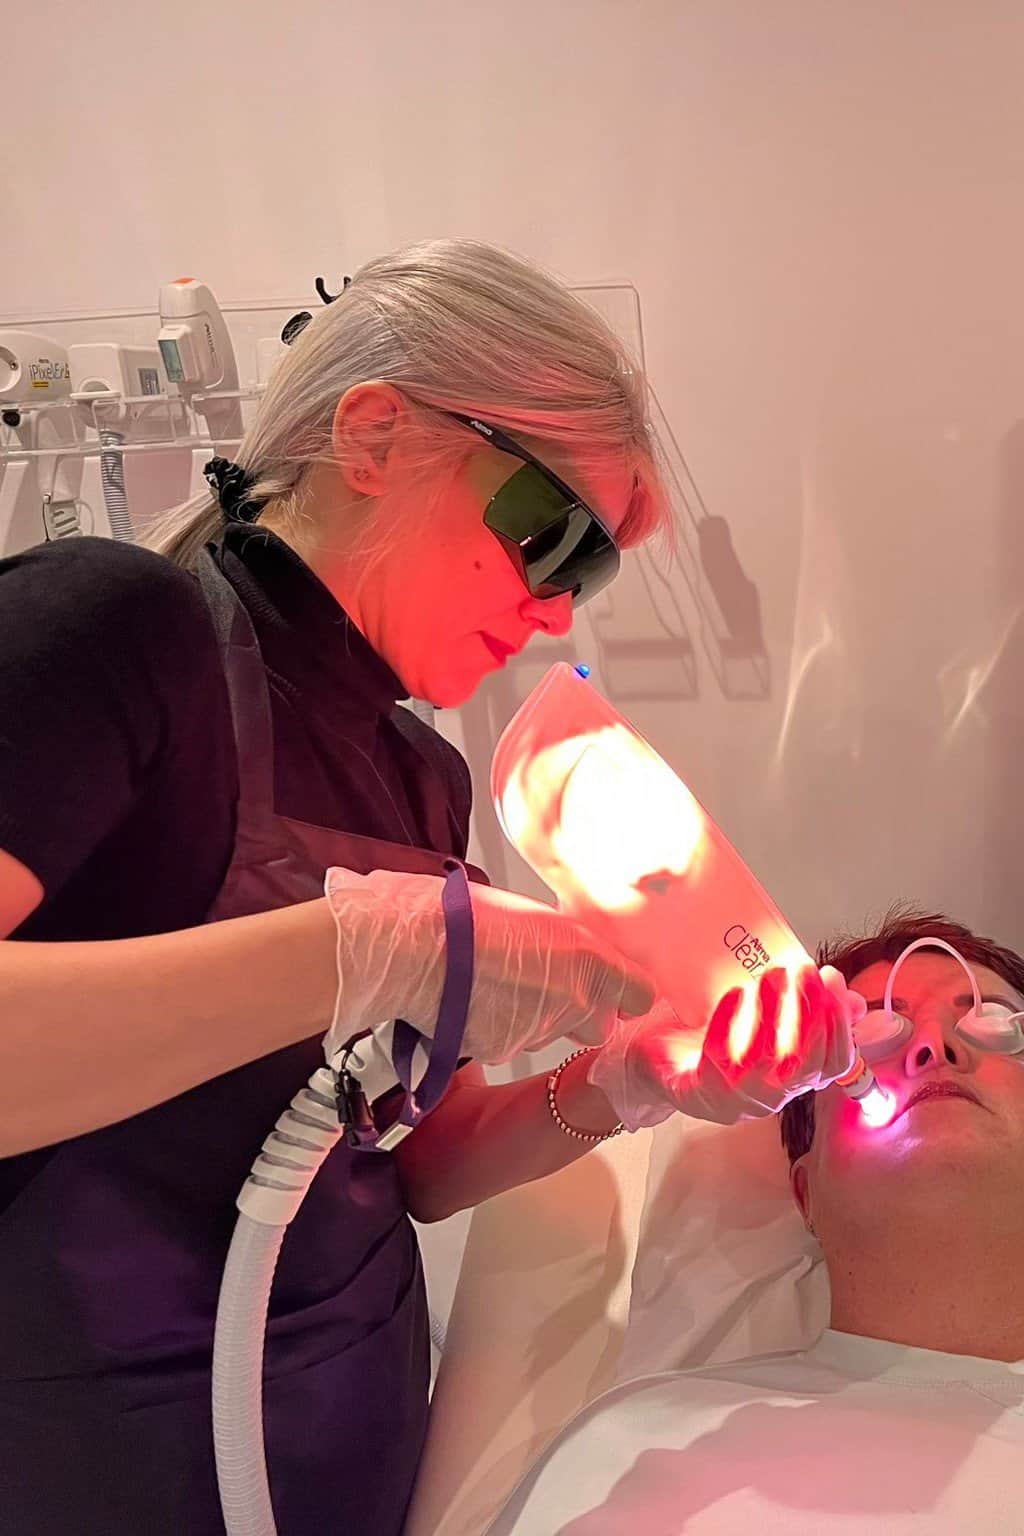 A female therapist is holding a facial laser and performing a treatment on a female clients face